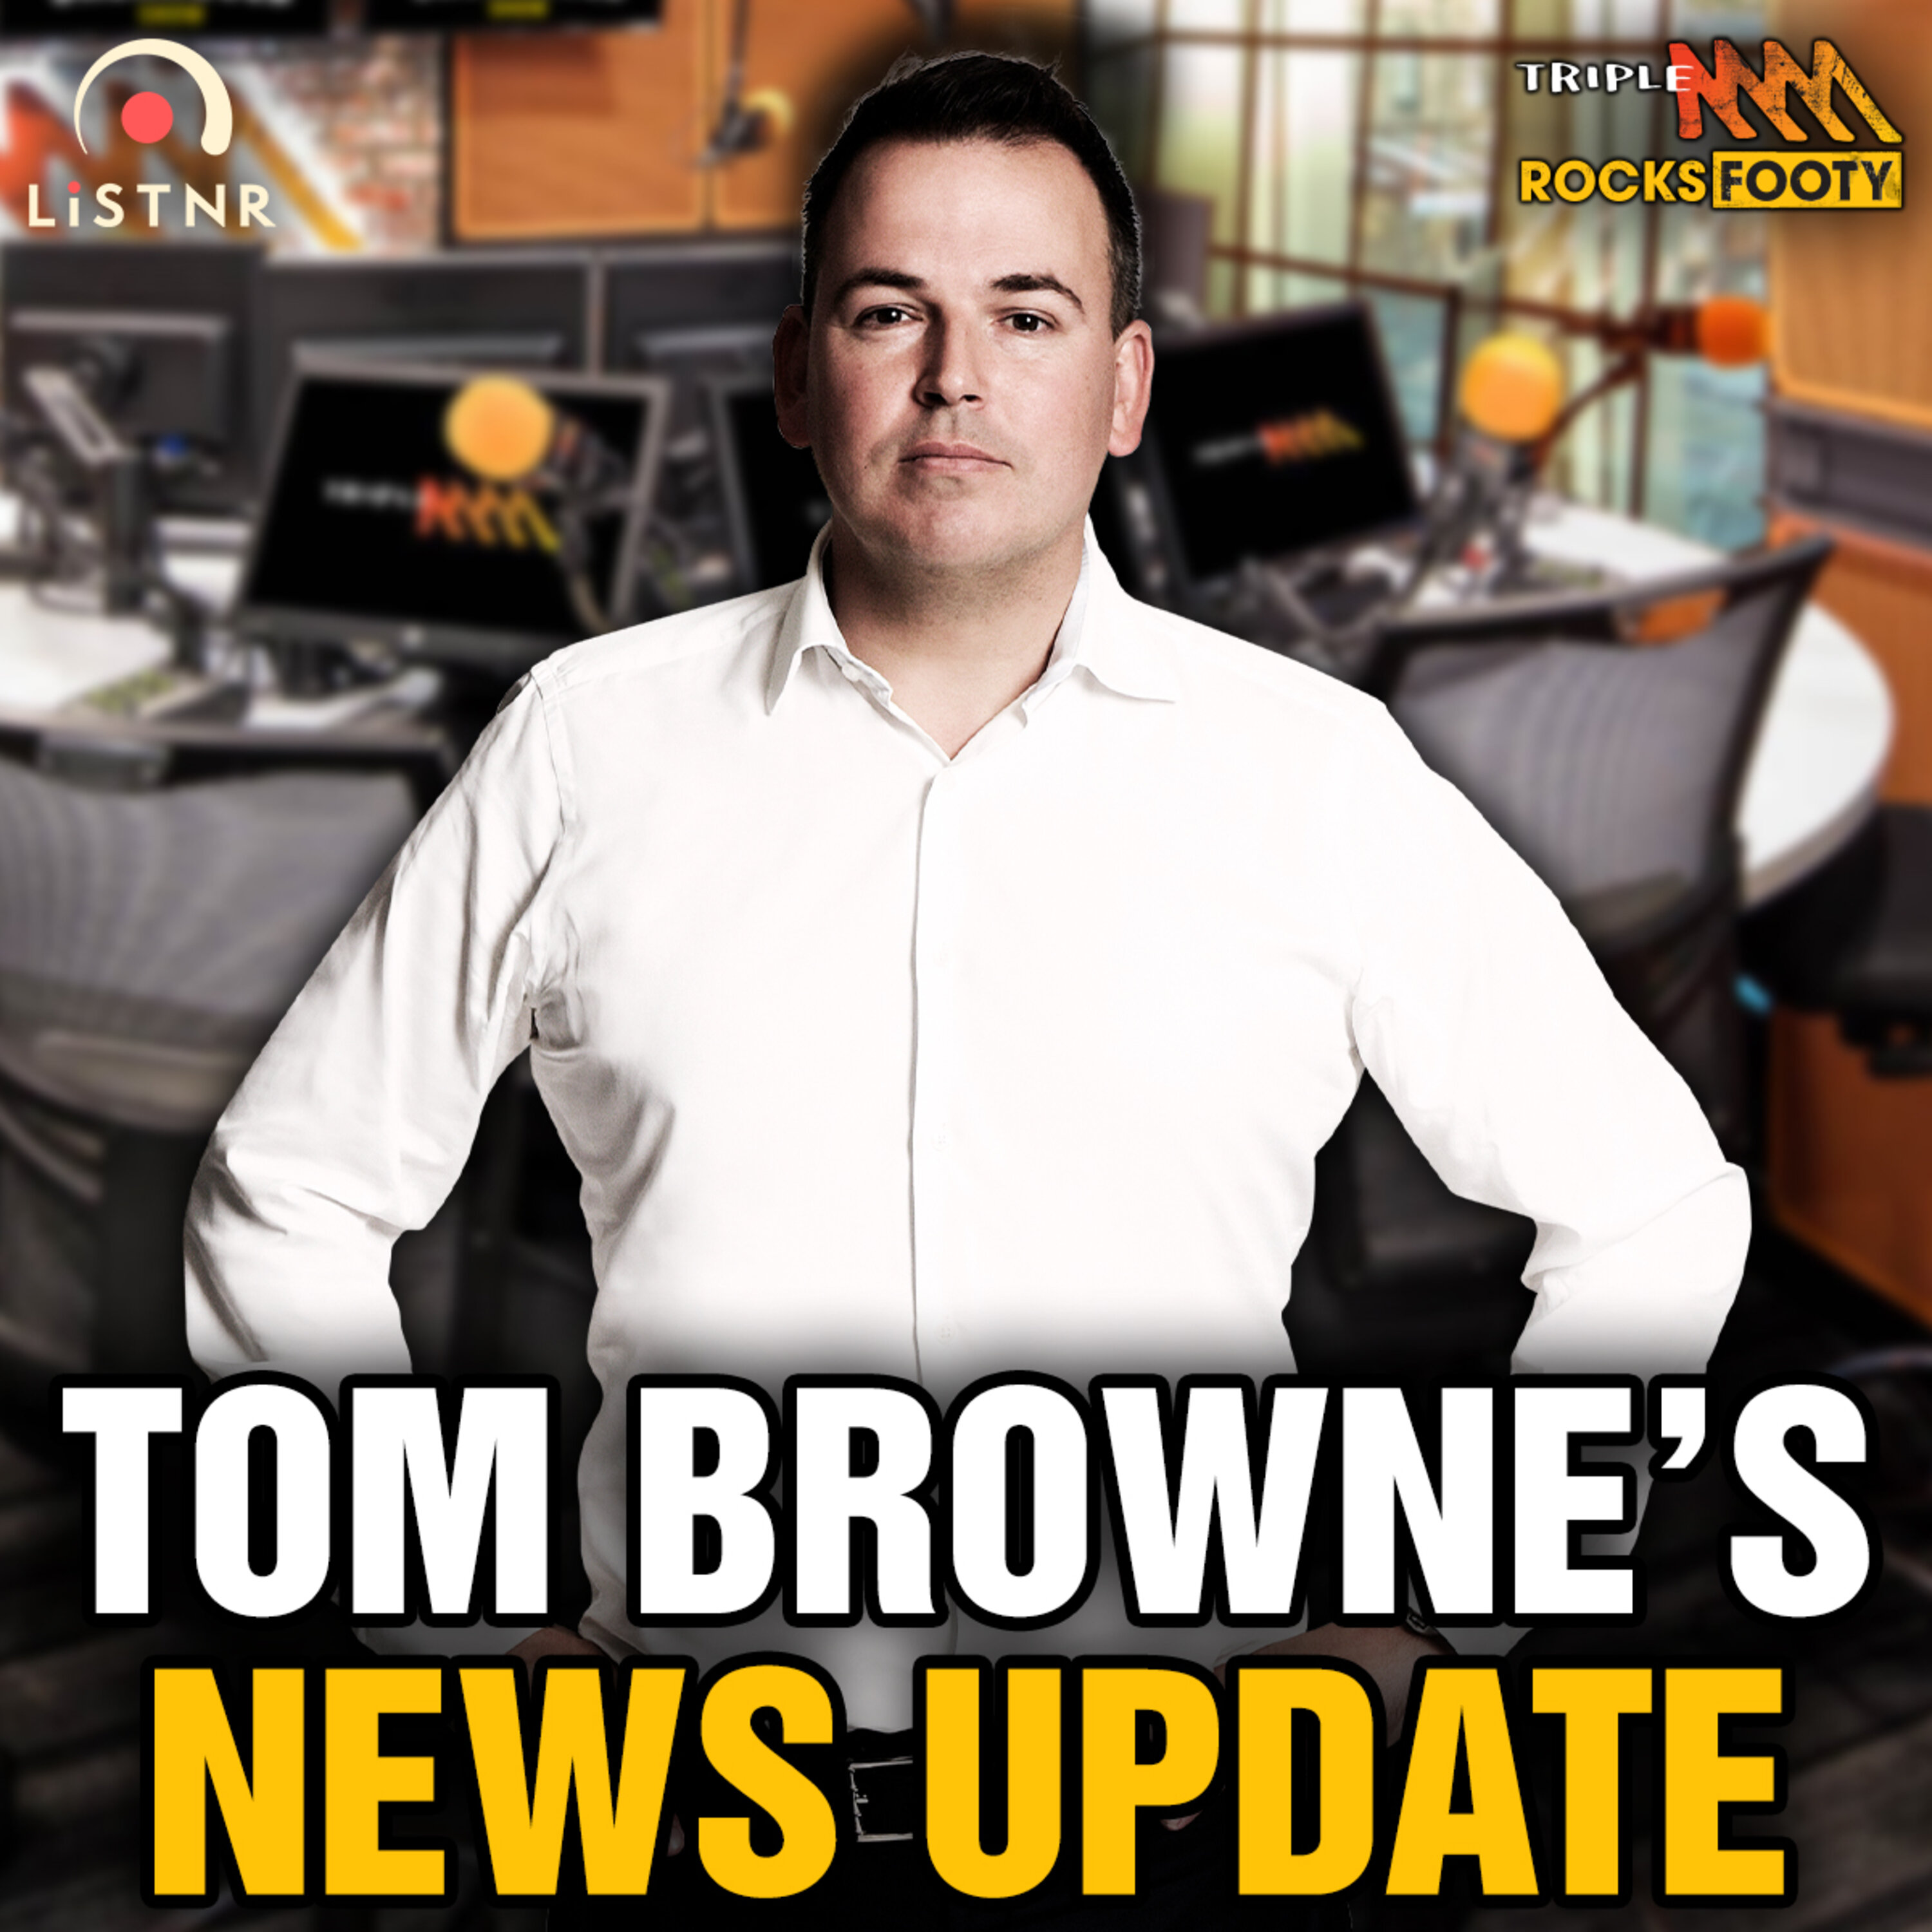 Tom Browne’s News | Trade update, the deals that could fall over, Andrew Thorburn’s resignation and who could replace him